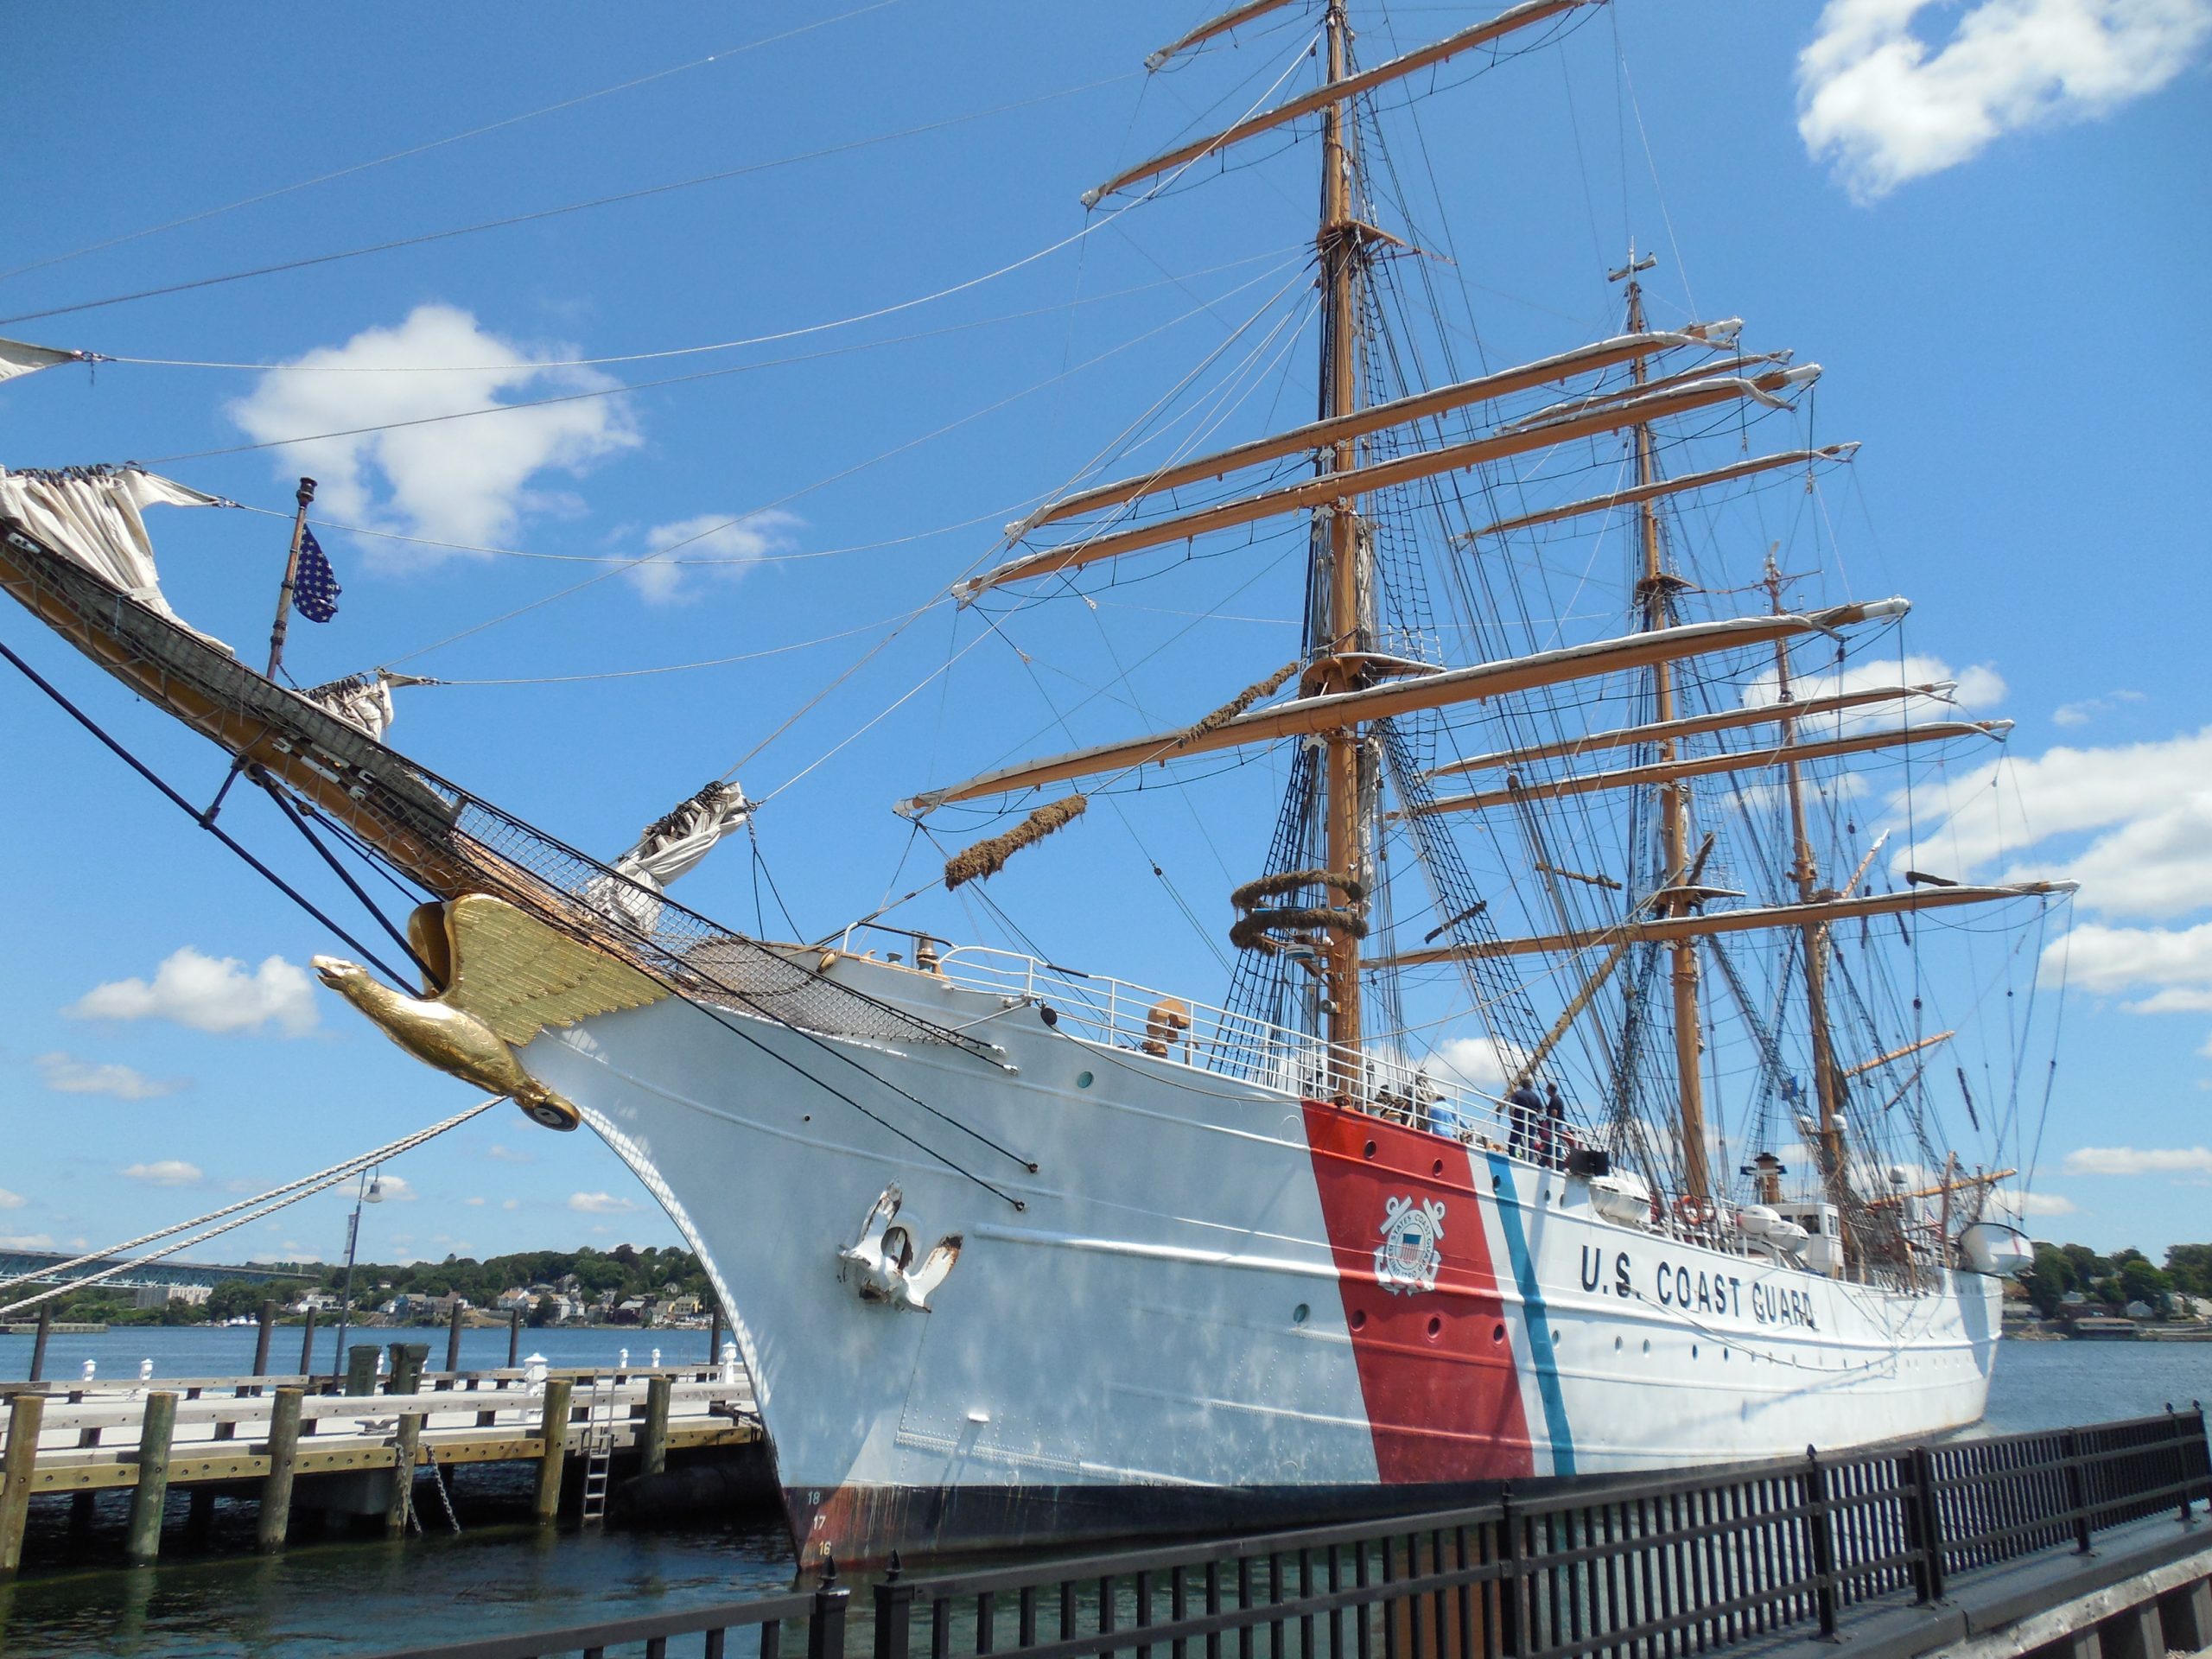 Large white sail boat with three masts next to a dock. It is labeled "US Coast Guard" on the side.